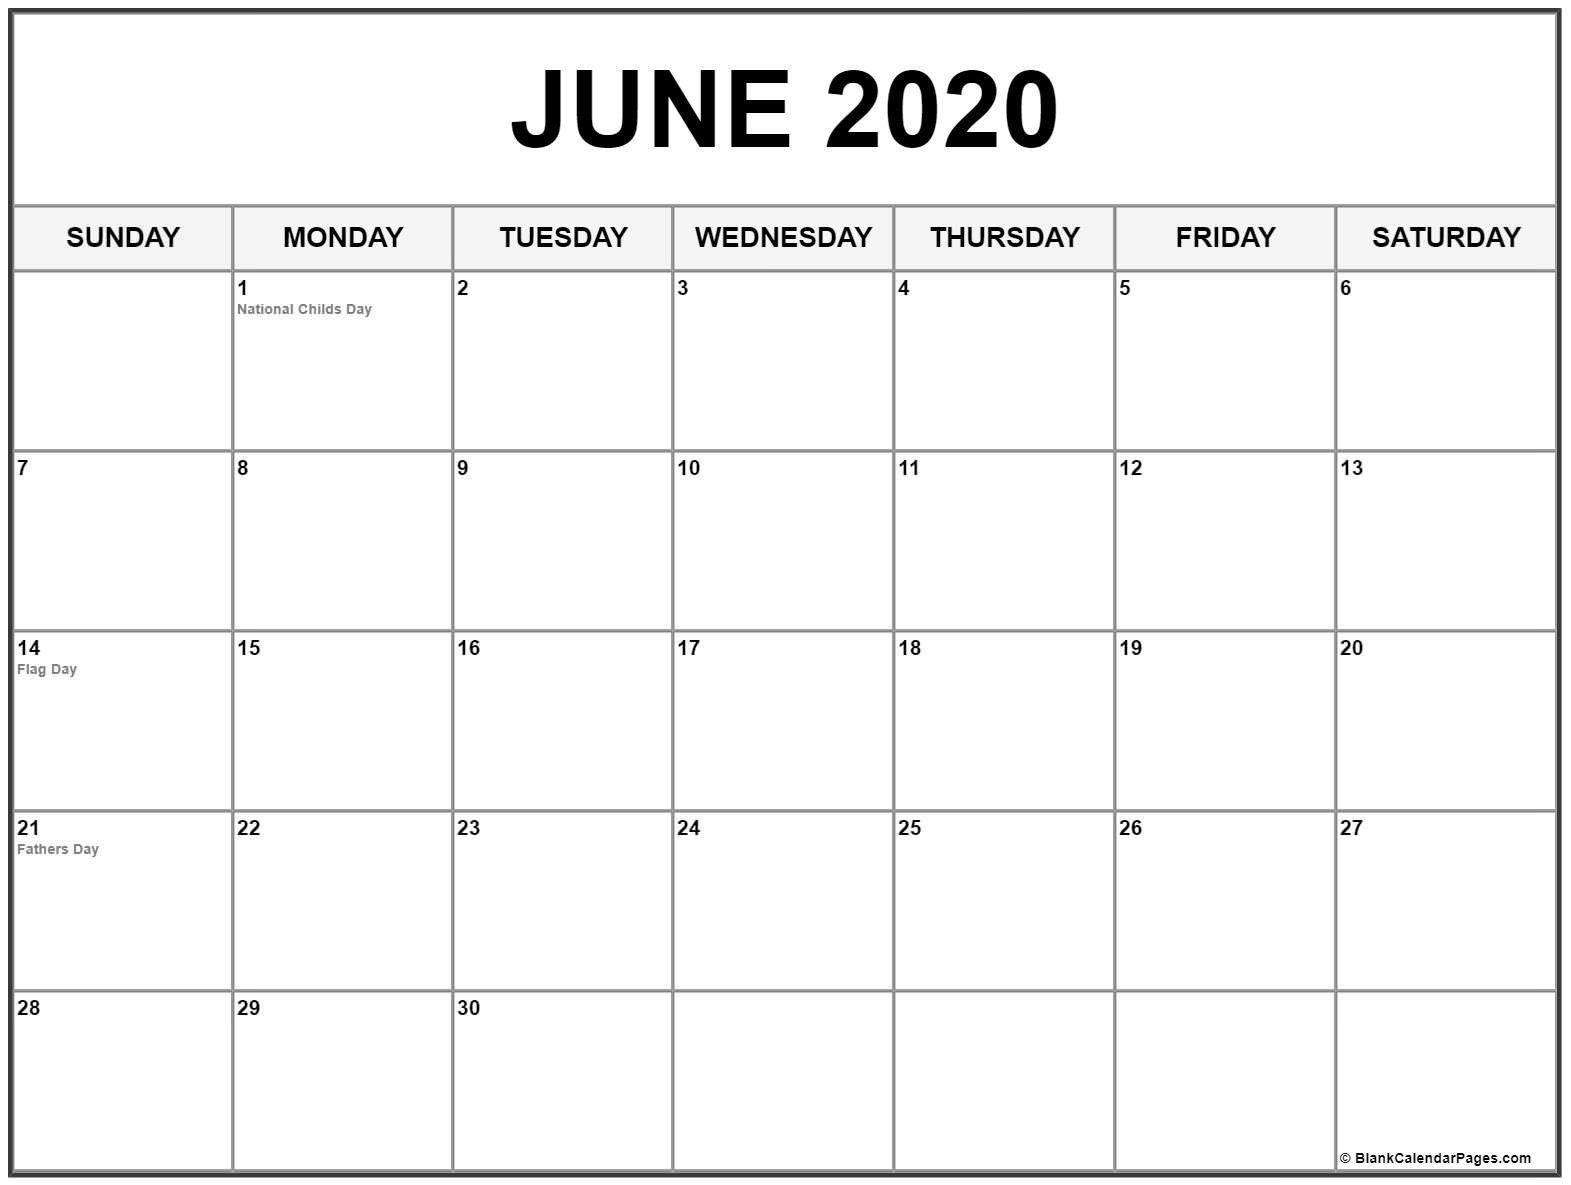 Collection Of June 2020 Calendars With Holidays Incredible June 2020 Calendar Canada